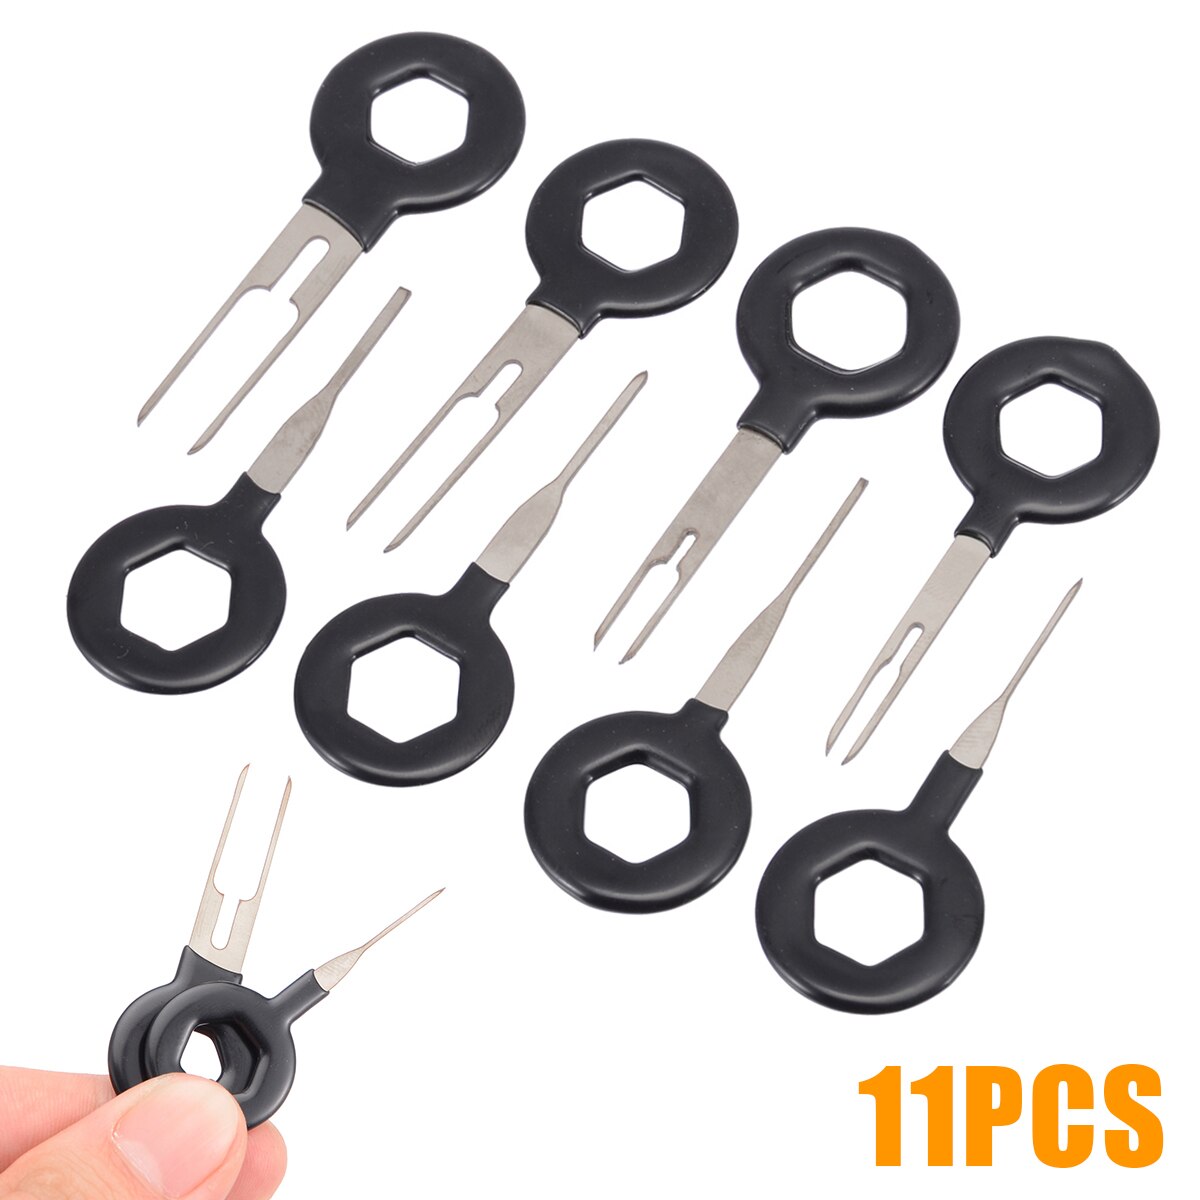 11 Stks/set Auto Removal Key Tool Elektrische Terminal Bedrading Crimp Connector Pin Verwijder Sleutel Kit Voor Auto Suv Pickup Off-Road